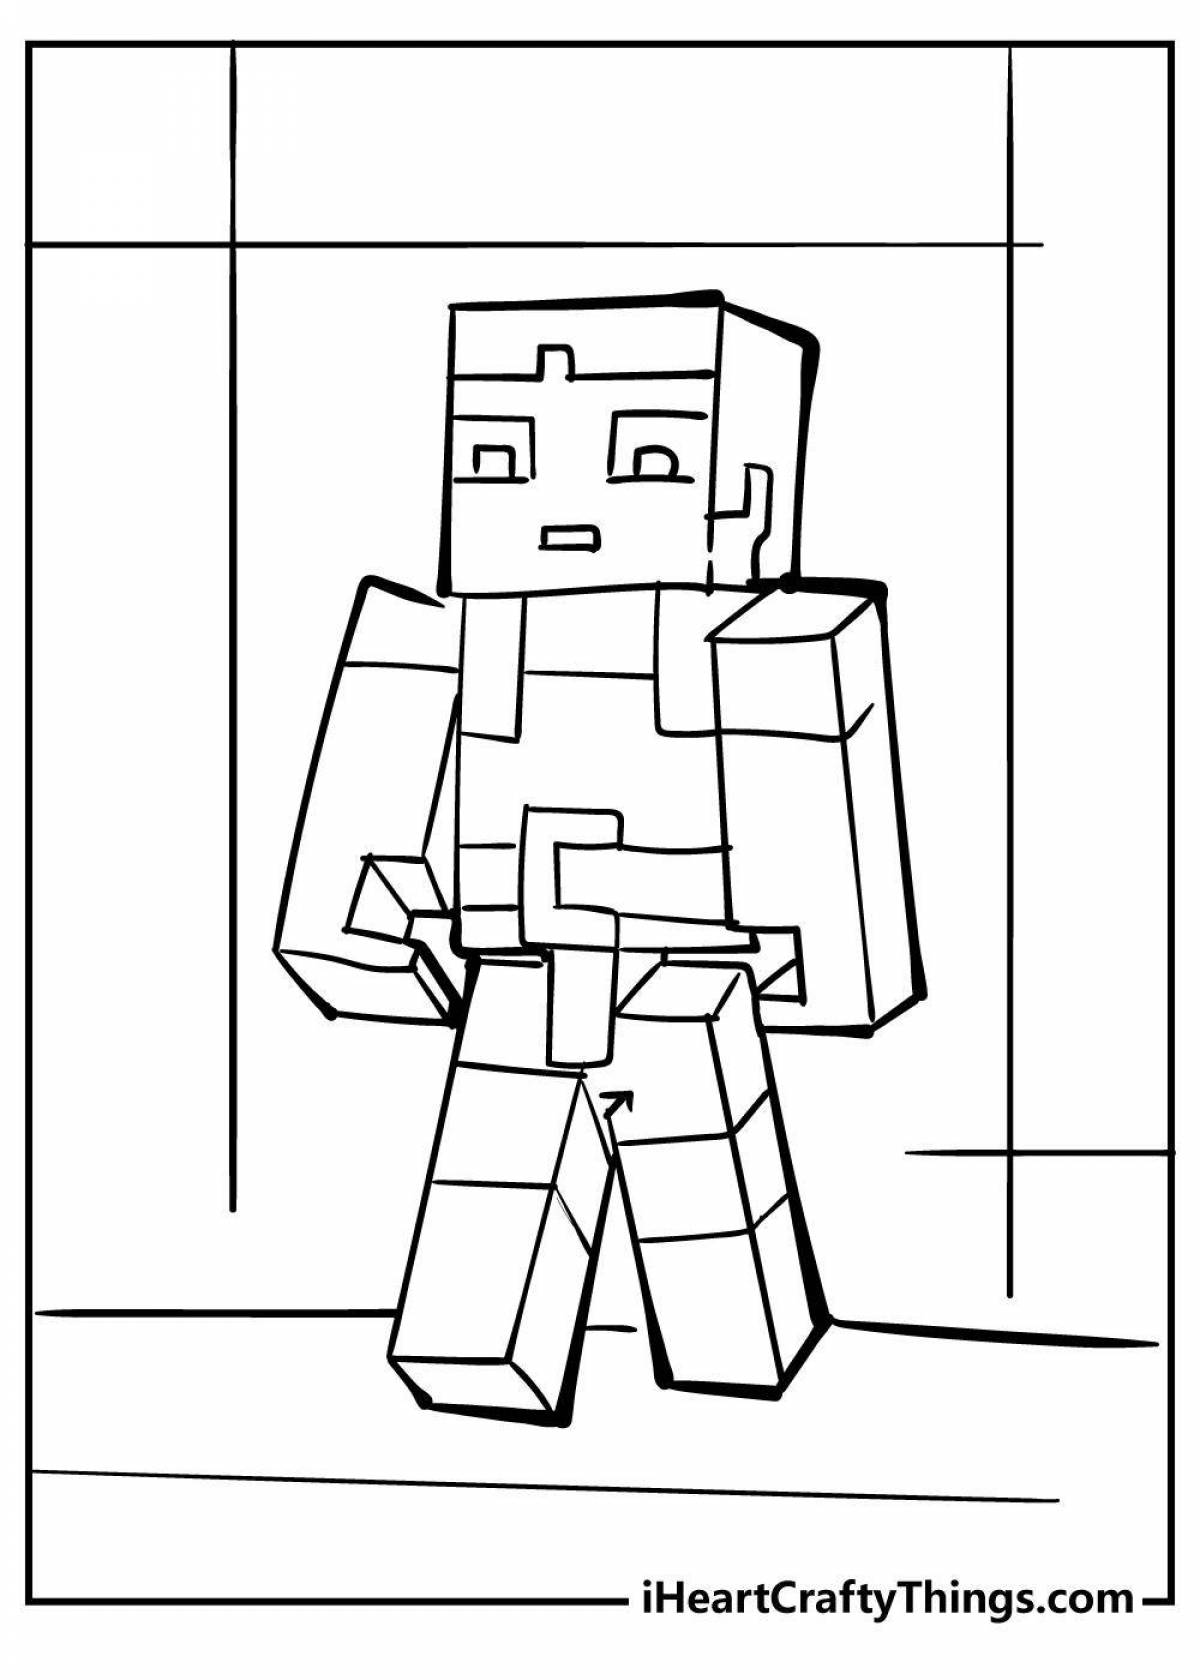 Exciting minecraft dungeon coloring